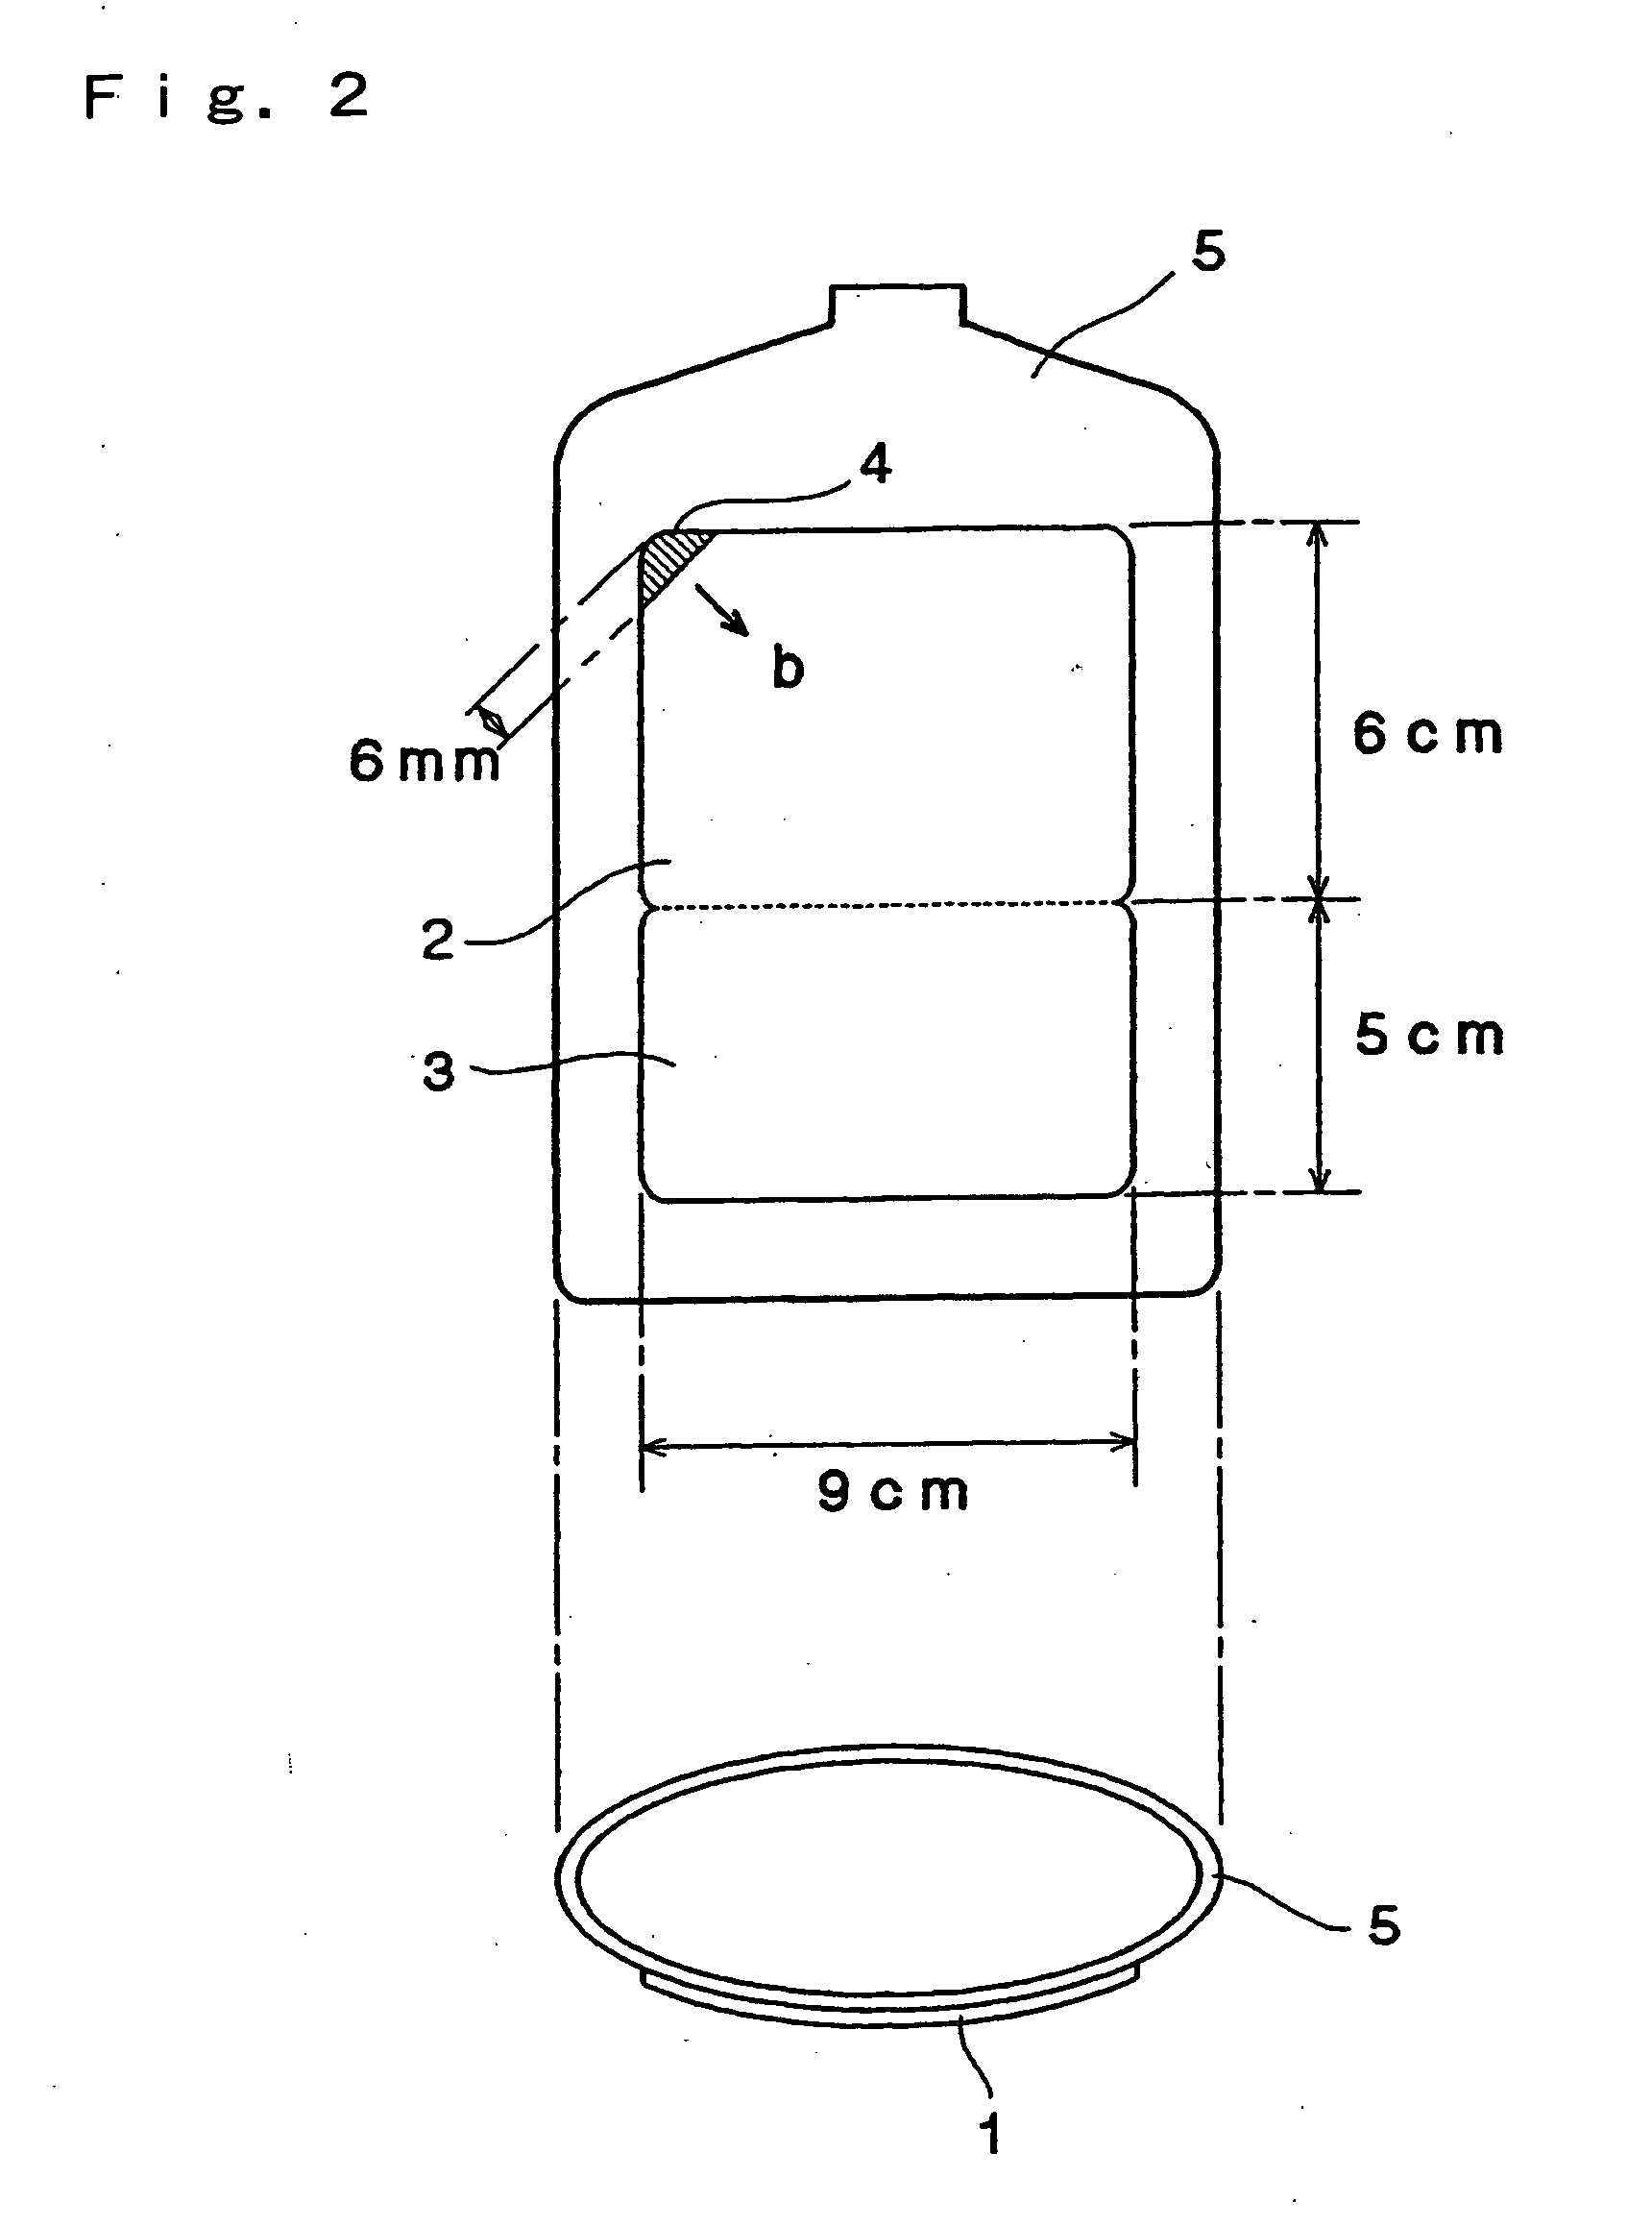 In-mold label with separable part